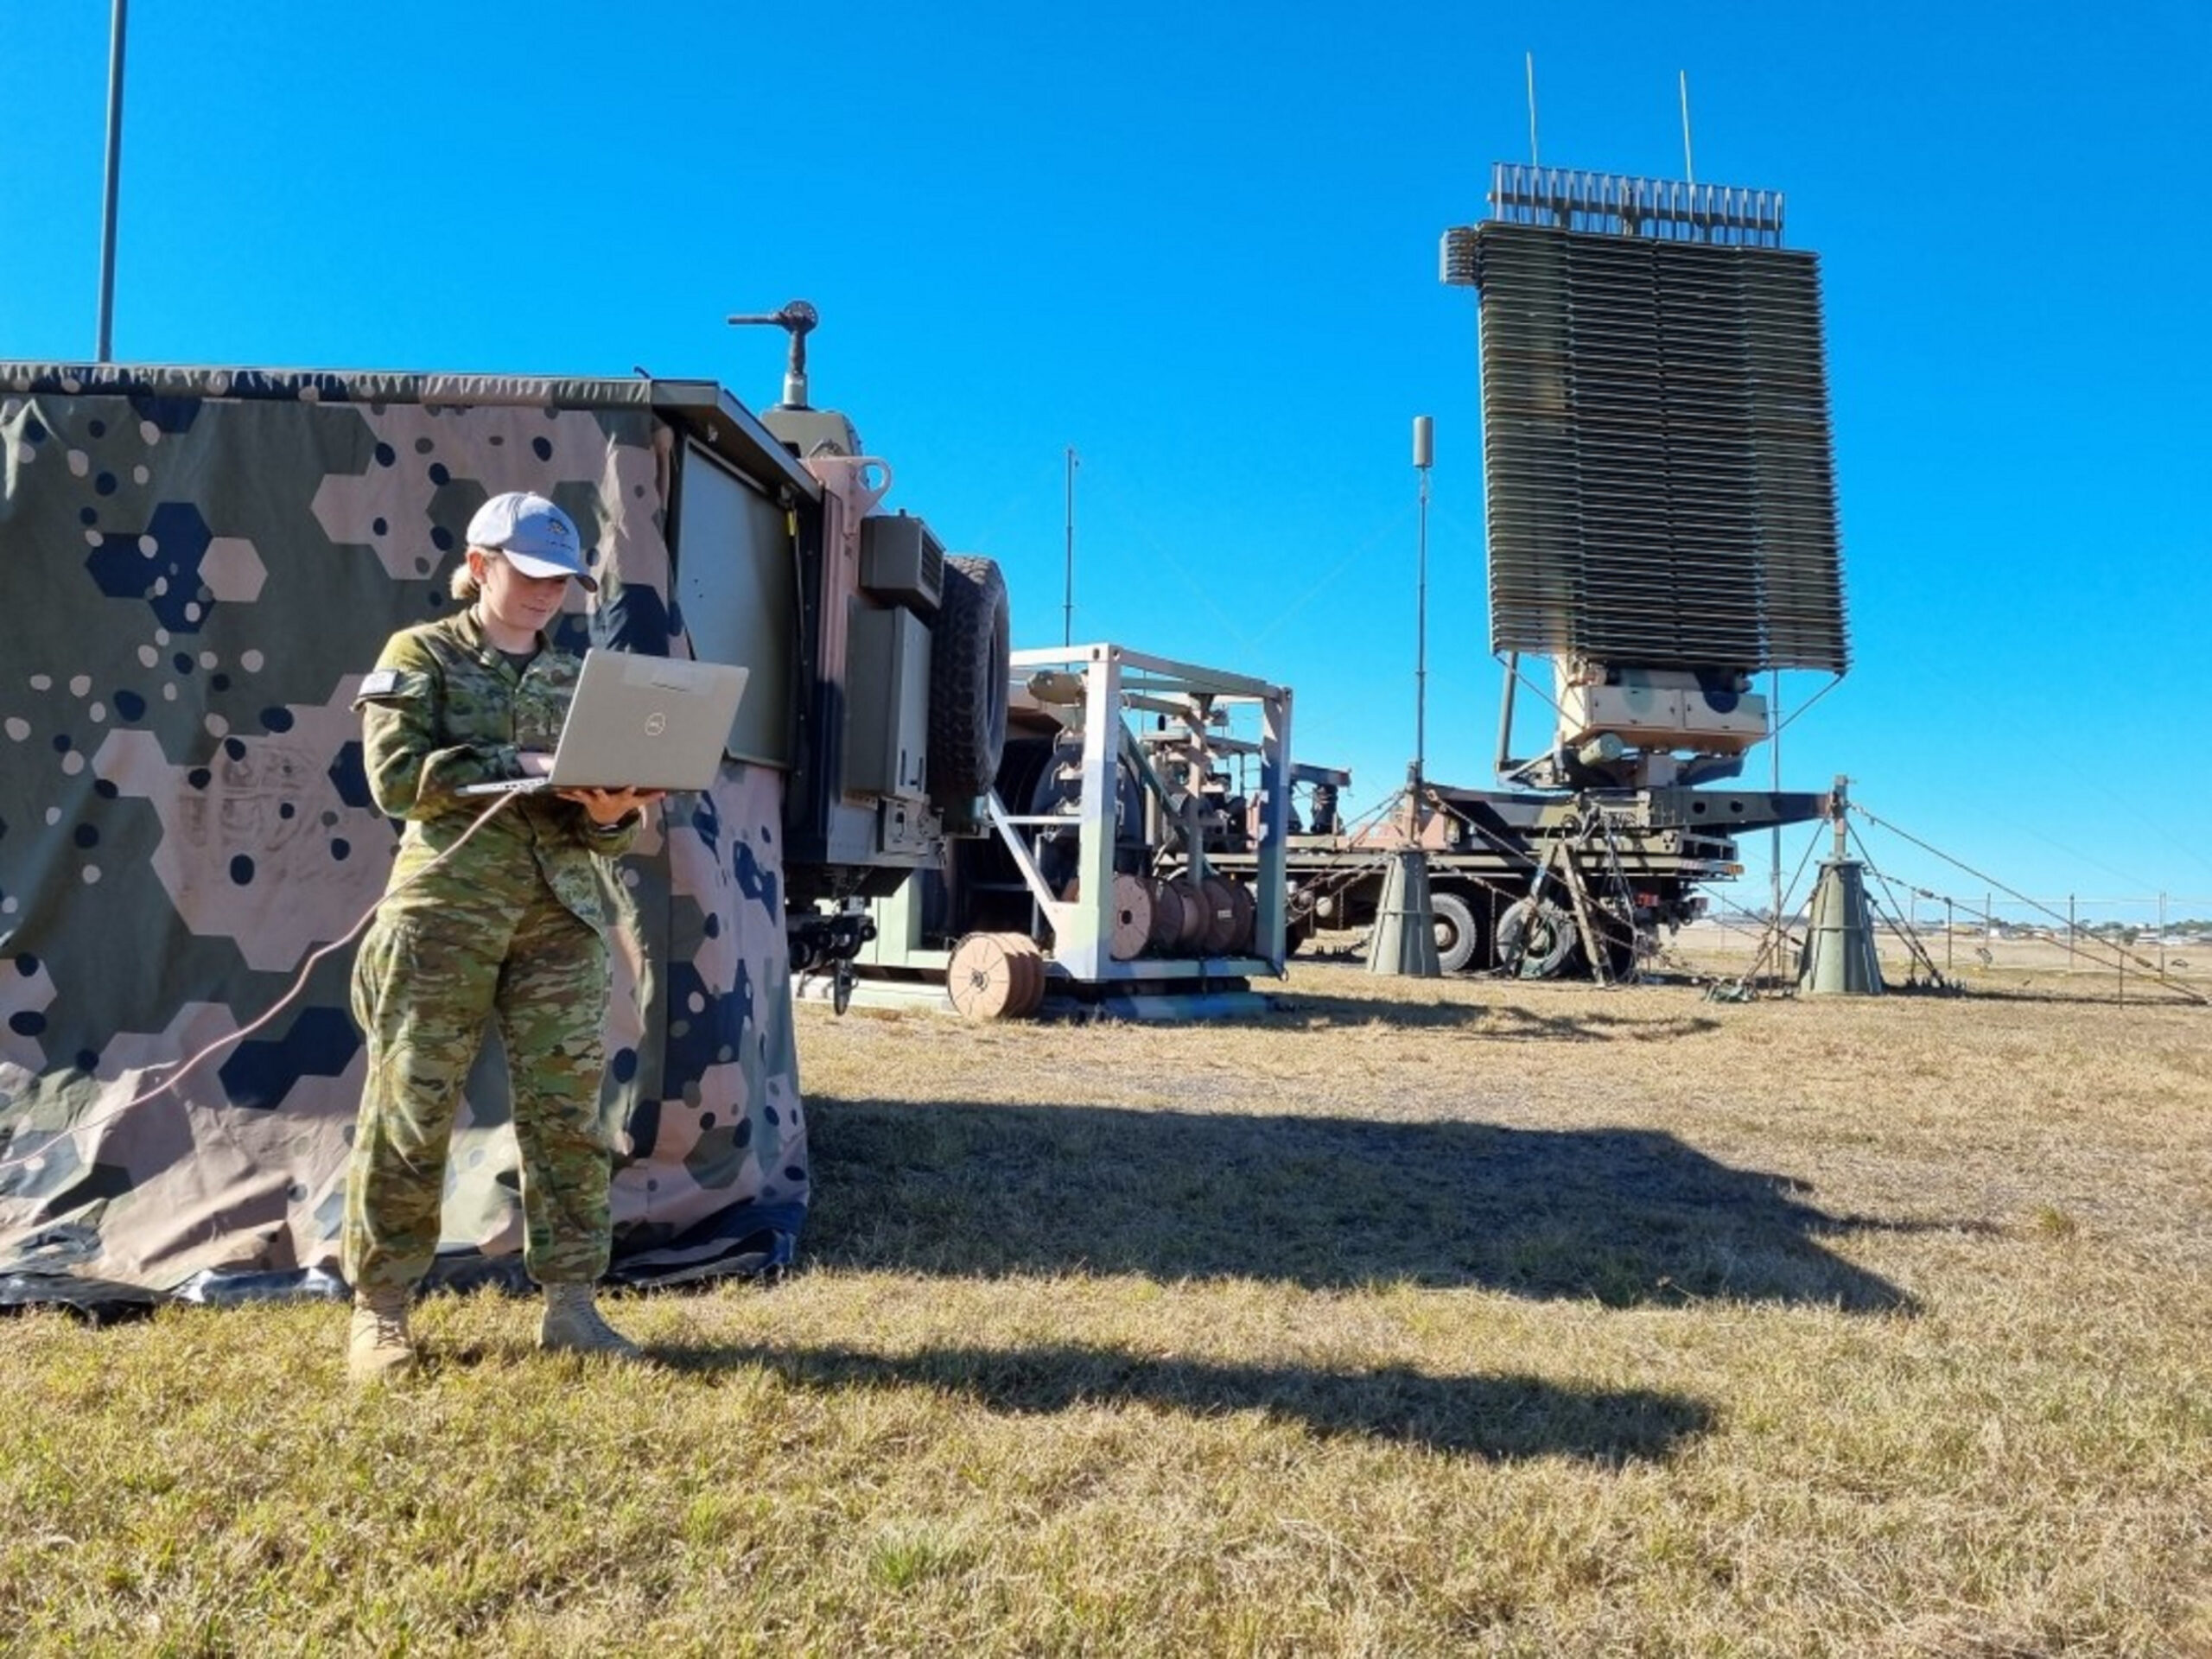 RAAF No. 3 Control and Reporting Unit (3CRU) with air surveillance and tactical air defence radar capabilities. Photo: Australian Defence